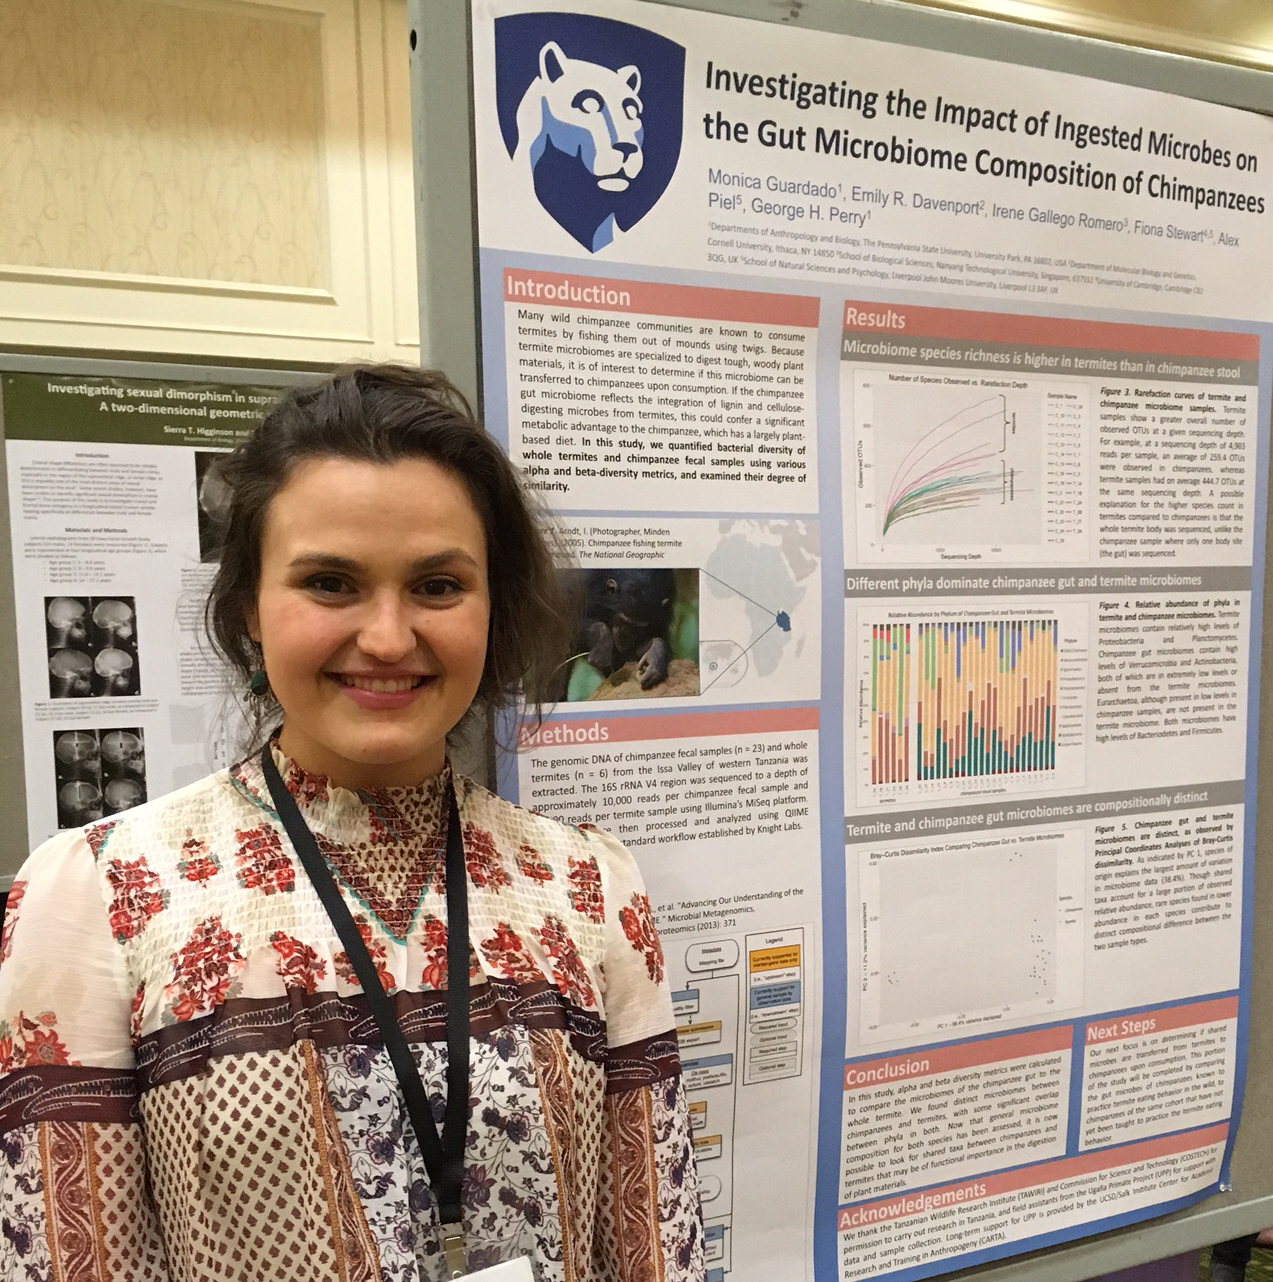  Undergraduate student Monica Guardado presenting her poster at the 2017 AAPA meeting in New Orleans. 